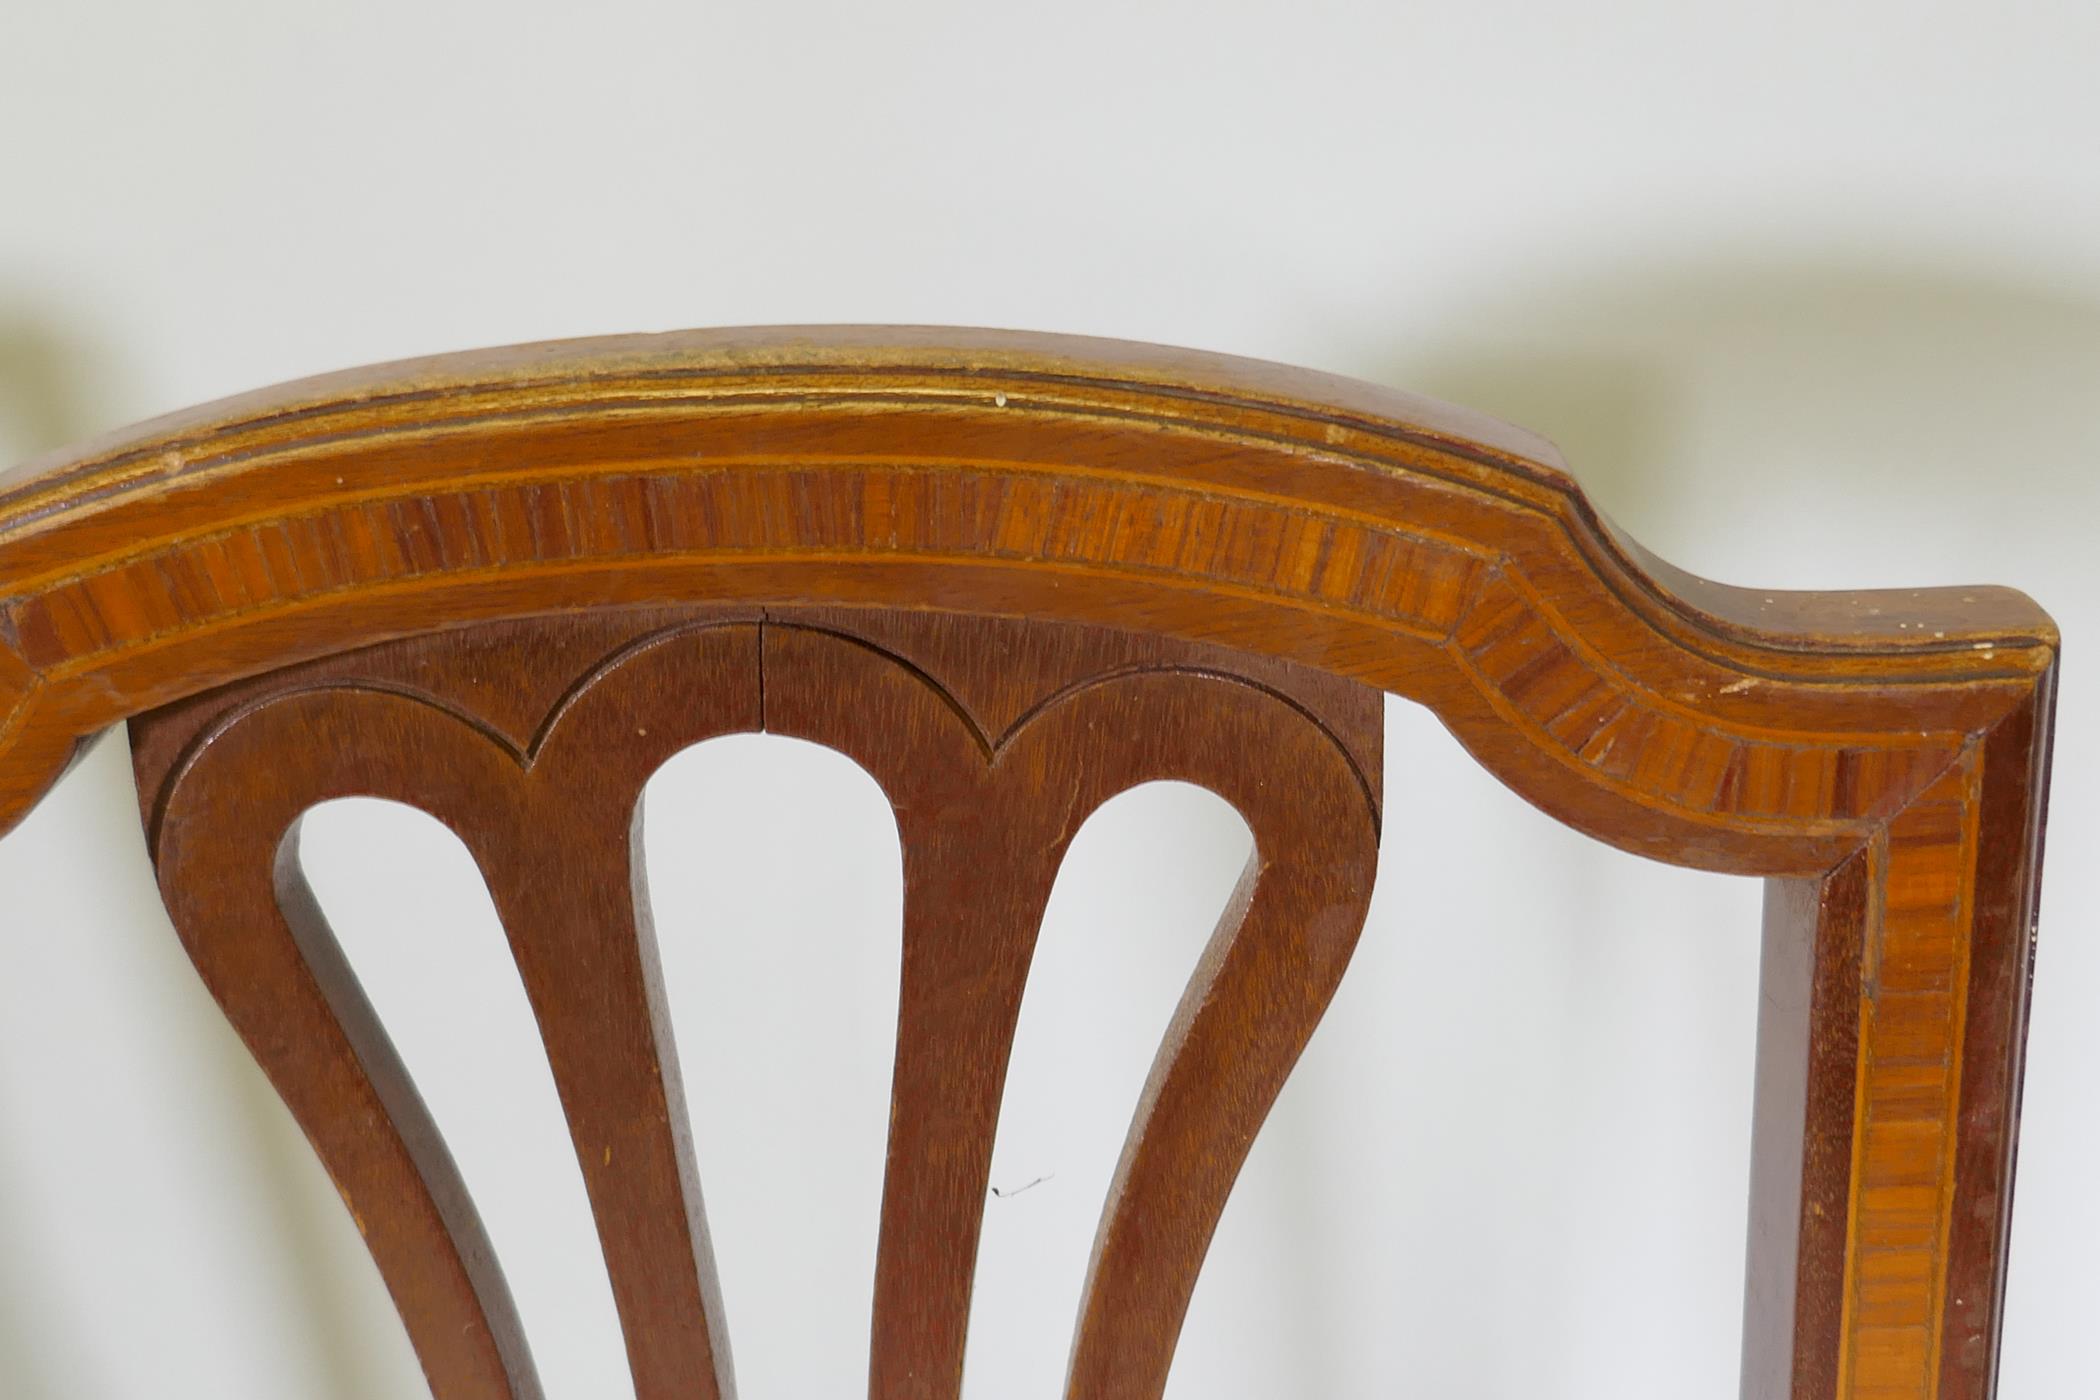 A pair of C19th continental neo-classical style mahogany and satinwood banded side chairs, with - Image 4 of 4